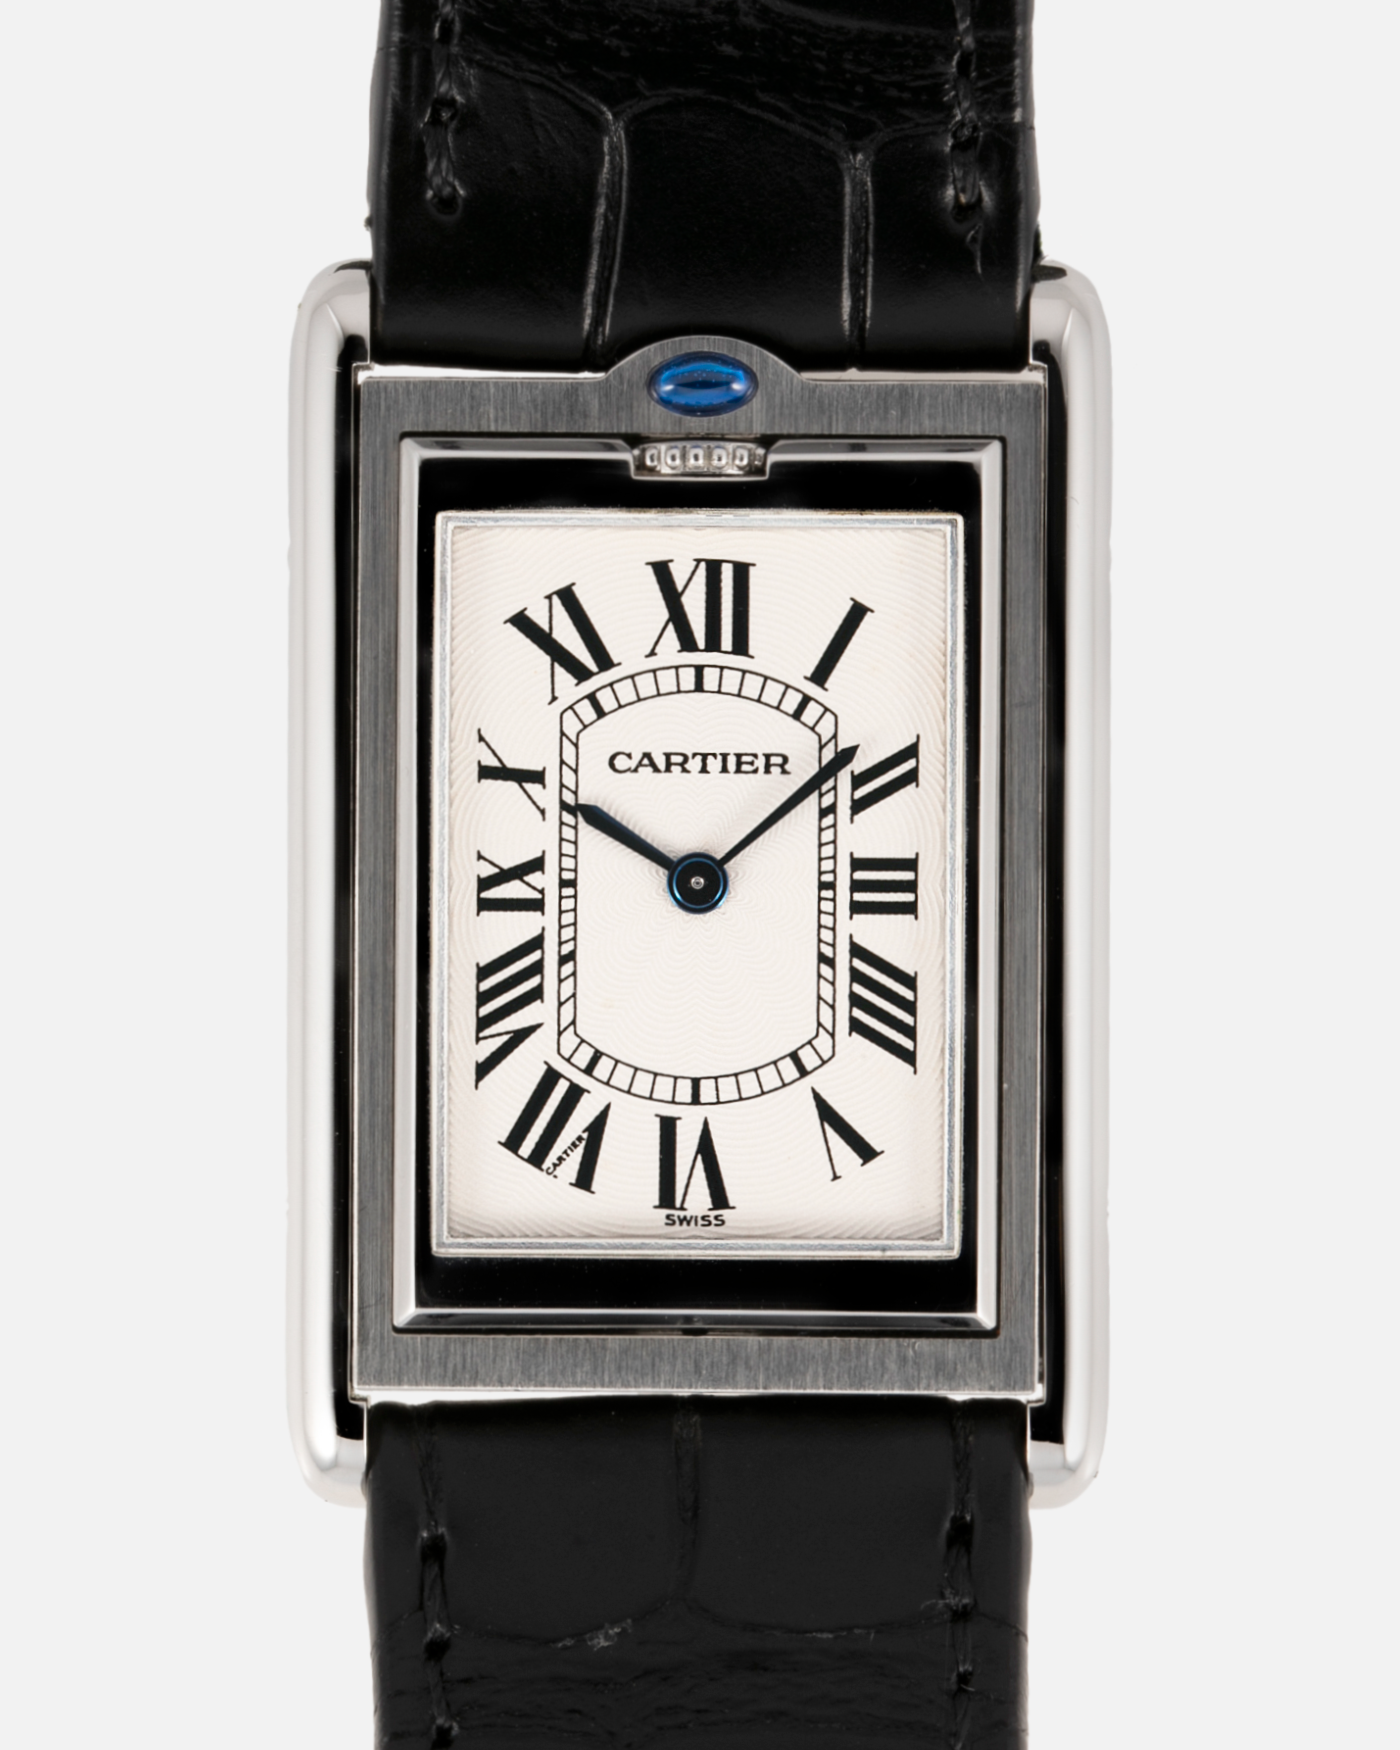 Brand: Cartier Year: 1990’s Model: Tank Basculante Reference: 2390 Material: Stainless Steel Movement: Piguet-derived Cartier cal. 050 MC Case Diameter: 26 x 38mm Strap: Black Cartier Alligator with Cartier Stainless Steel Tang Buckle